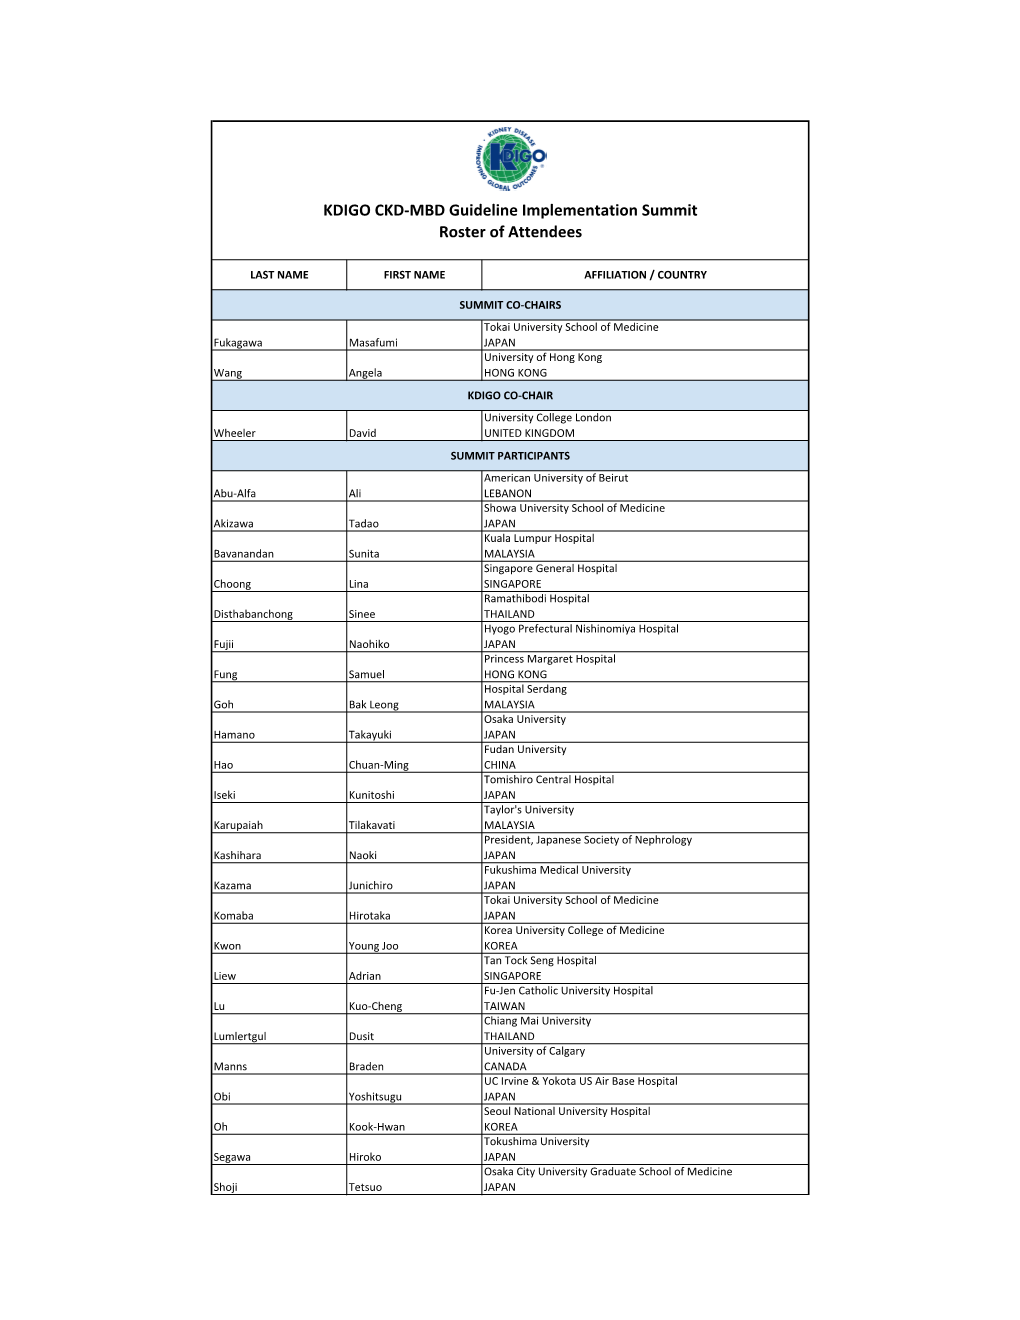 KDIGO CKD-MBD Guideline Implementation Summit Roster of Attendees